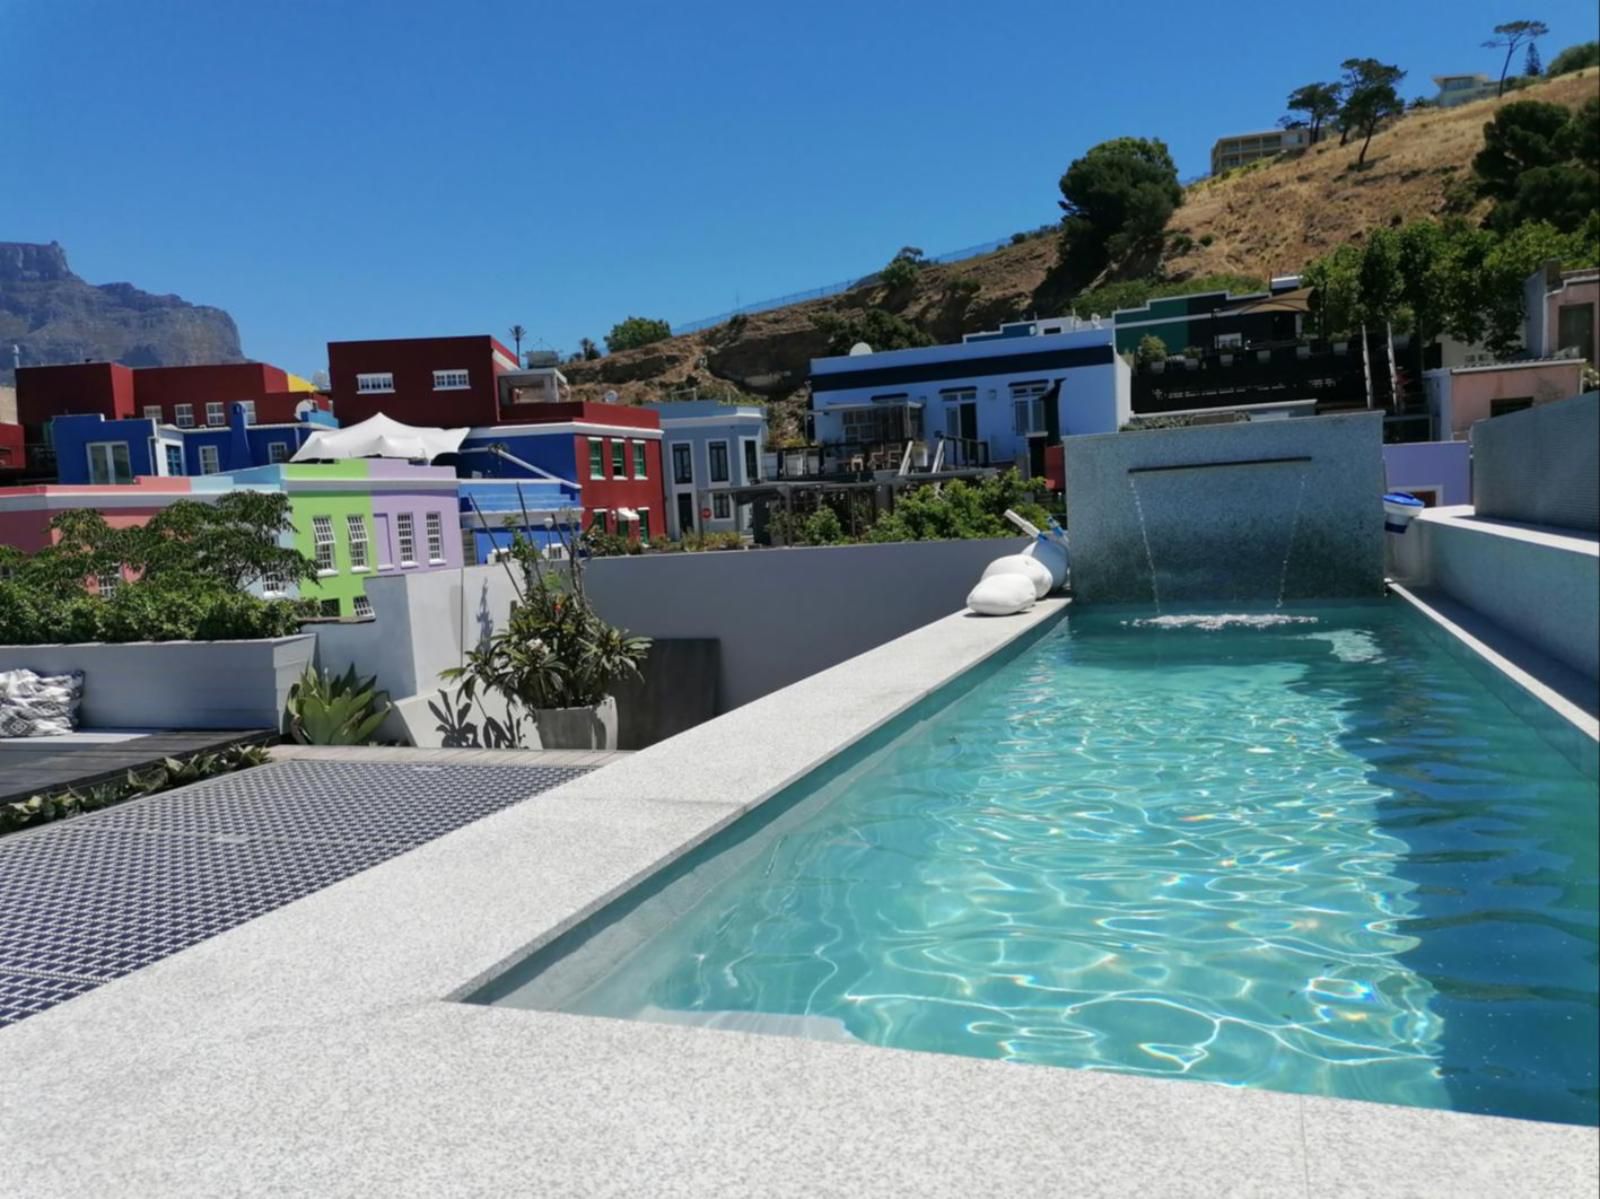 Cape Finest Guesthouse De Waterkant Cape Town Western Cape South Africa House, Building, Architecture, Swimming Pool